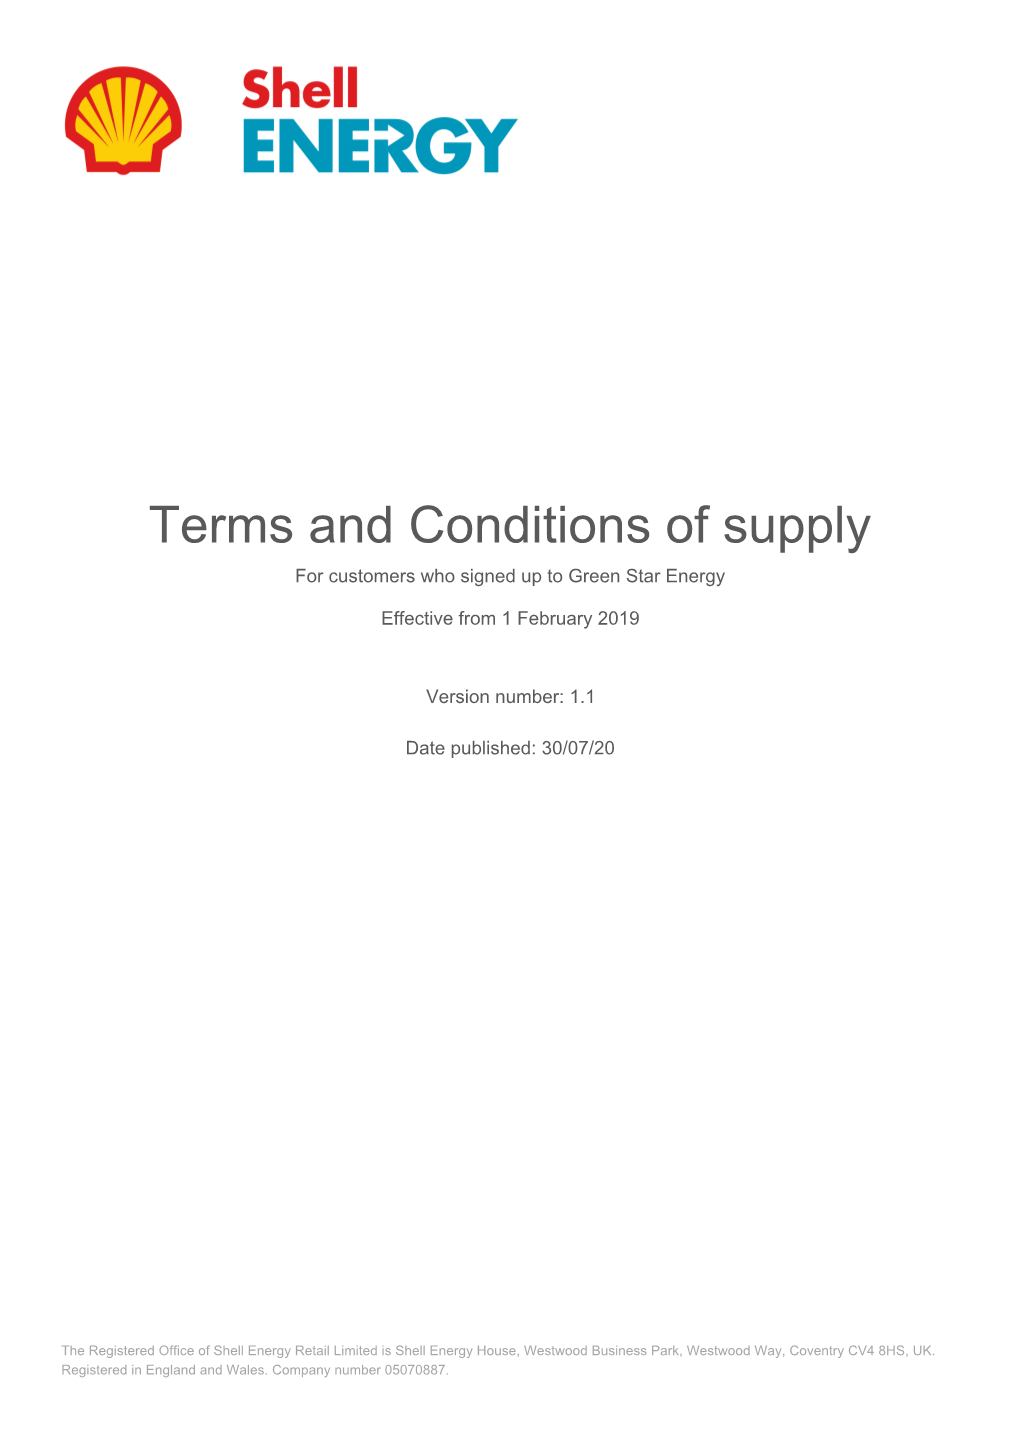 Terms and Conditions of Supply for Customers Who Signed up to Green Star Energy